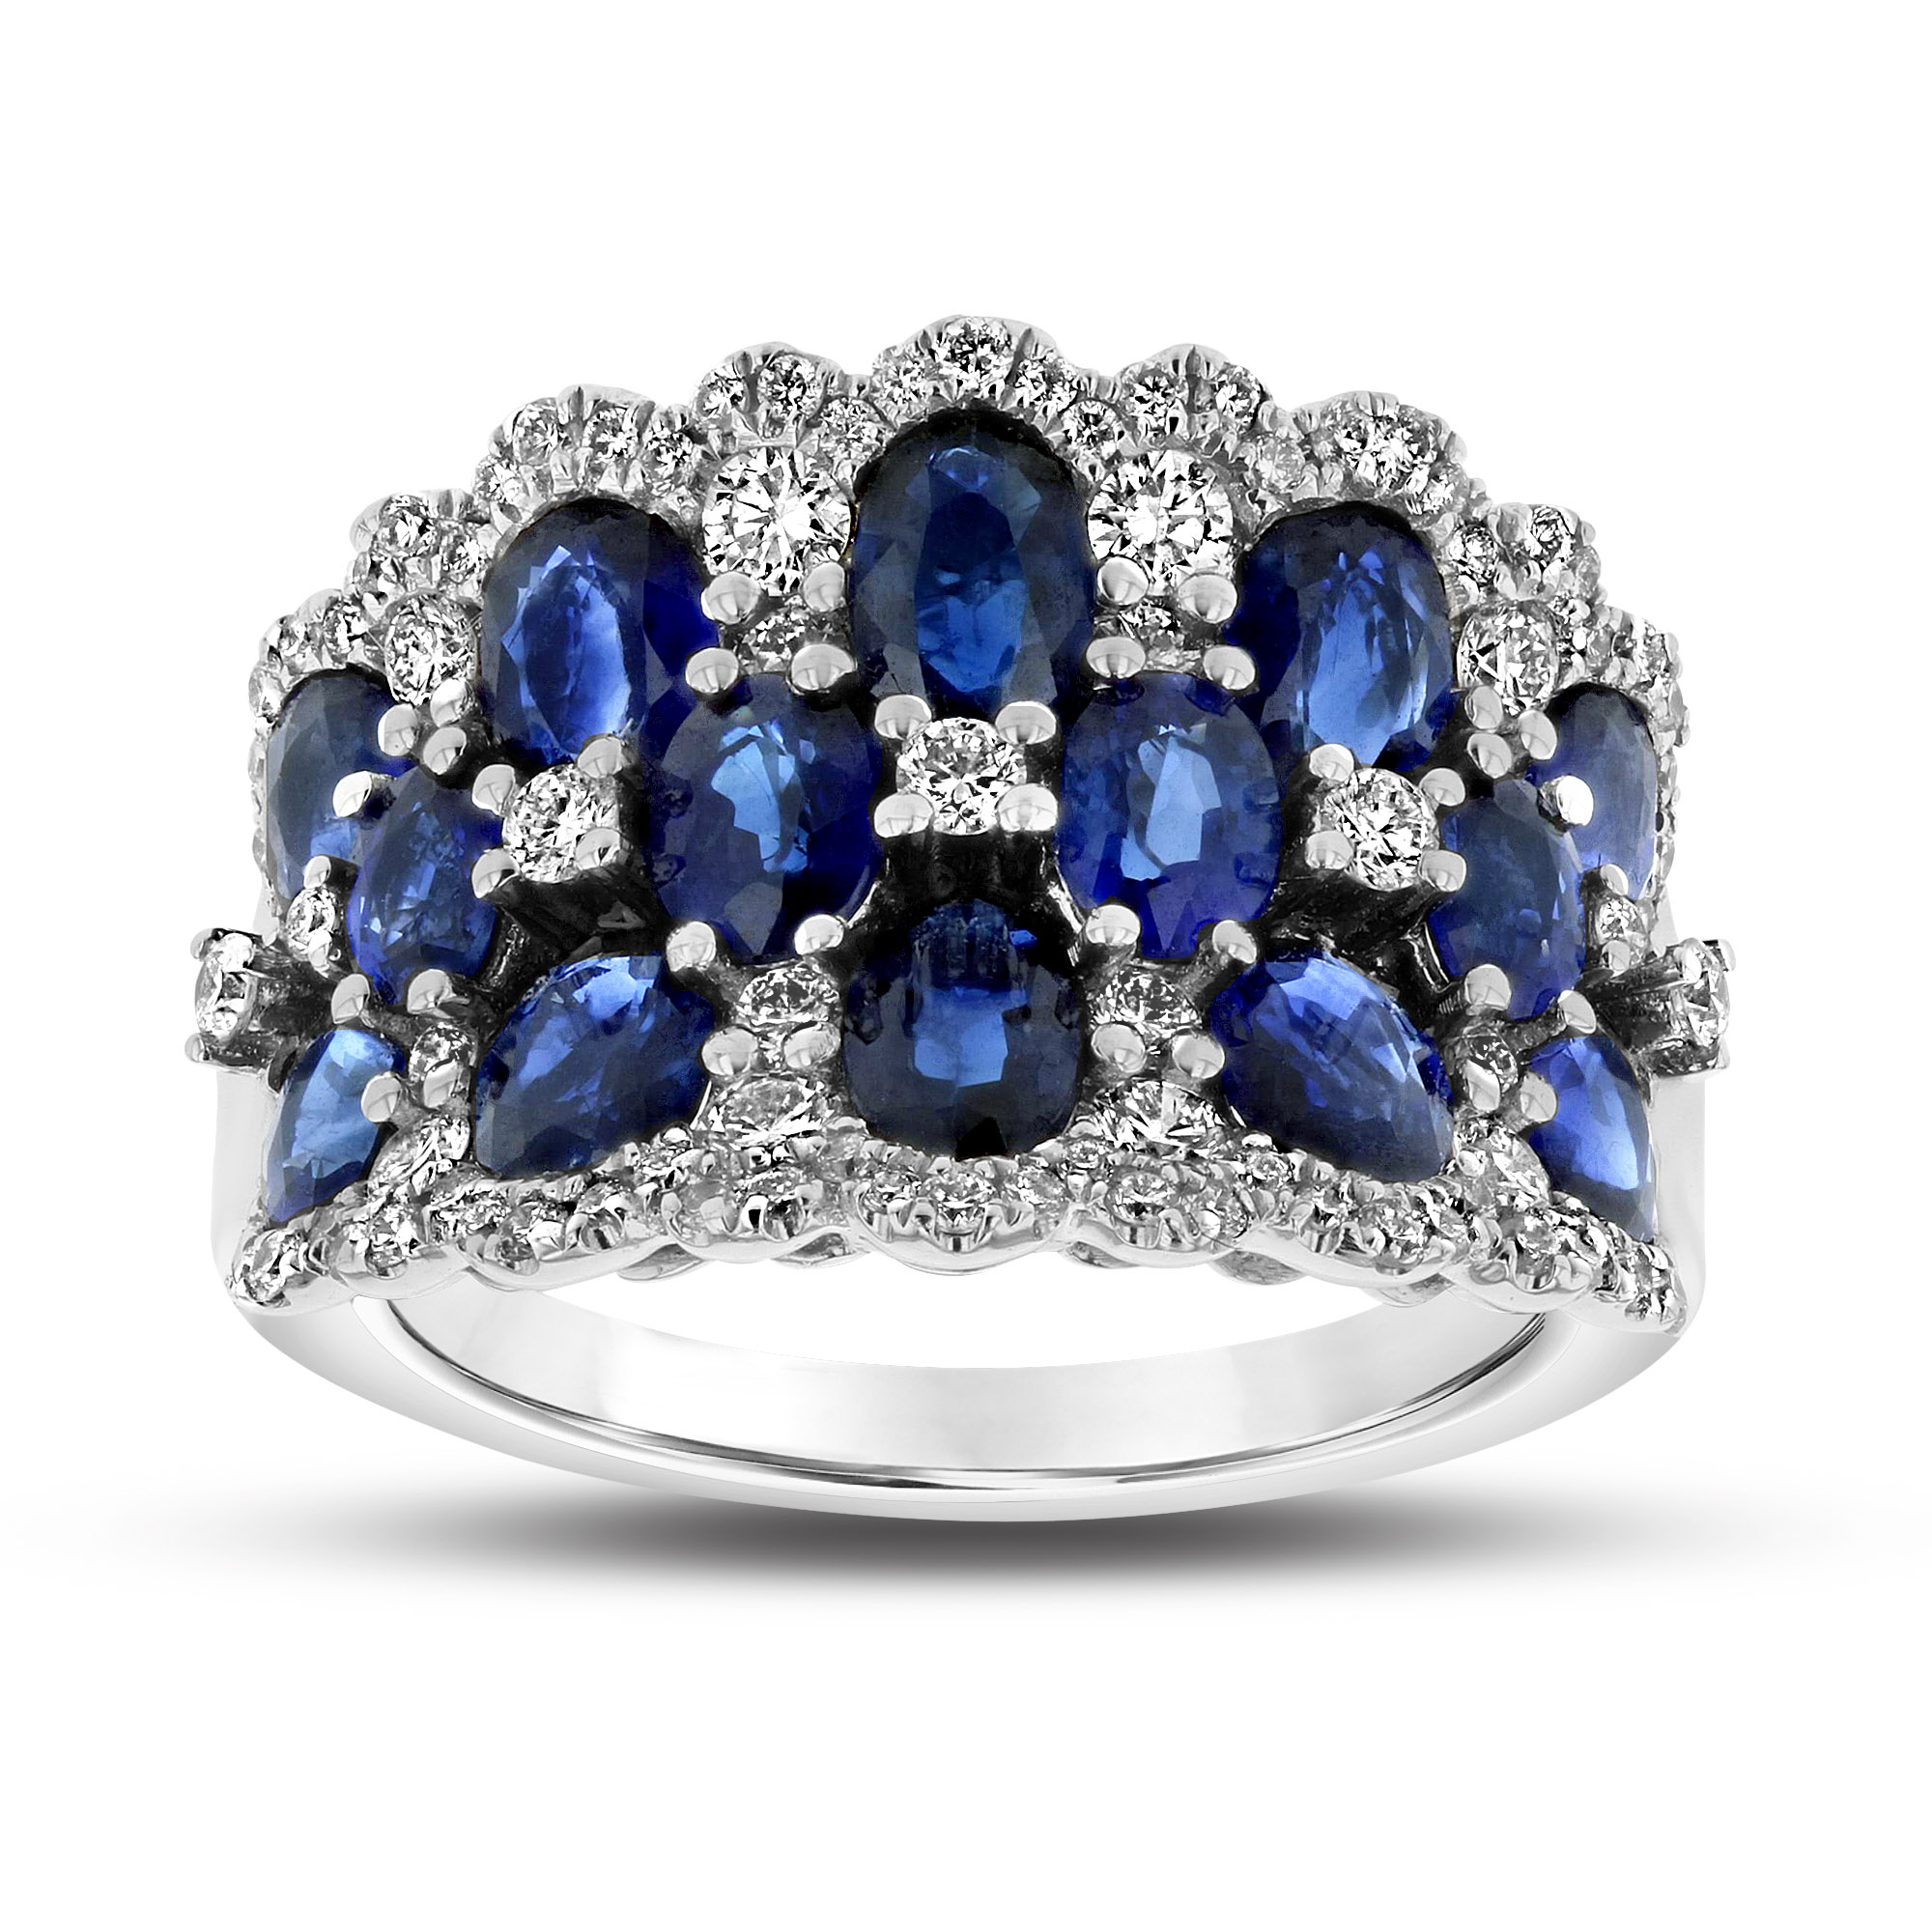 View 3.86ctw Diamond and Sapphire Ring in 18k White Gold